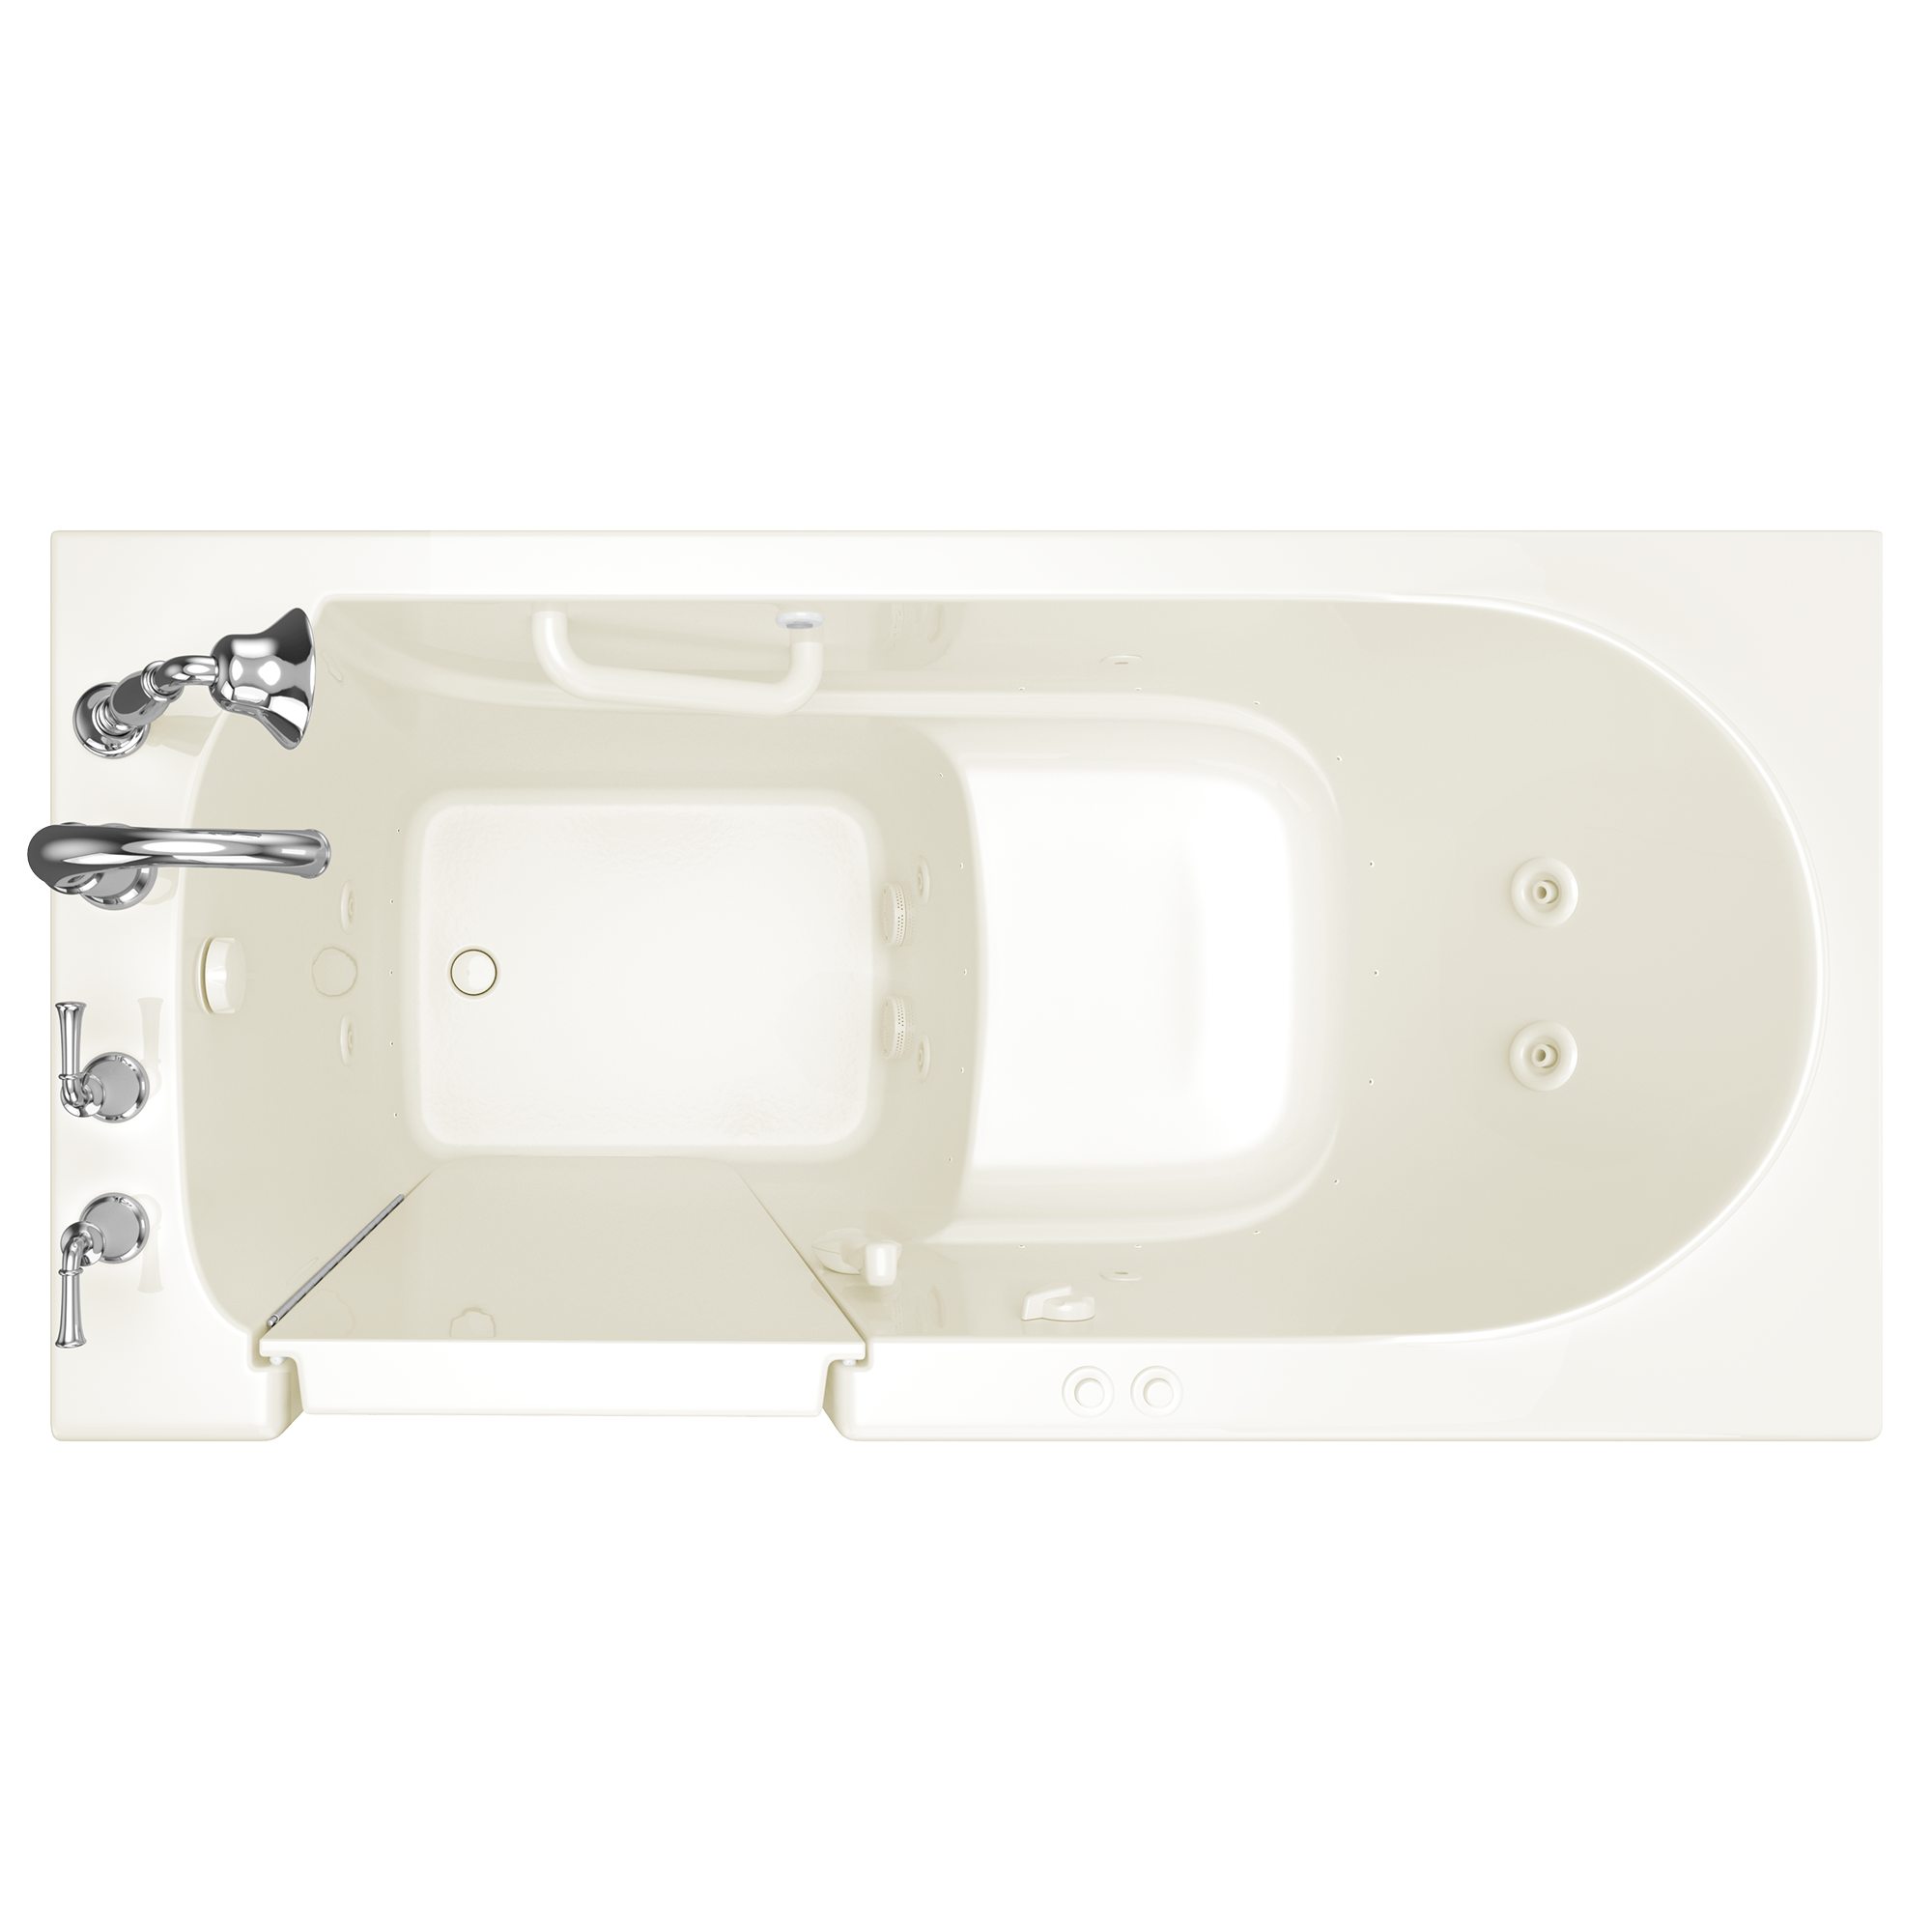 Gelcoat Value Series 30 x 60 -Inch Walk-in Tub With Combination Air Spa and Whirlpool Systems - Left-Hand Drain With Faucet